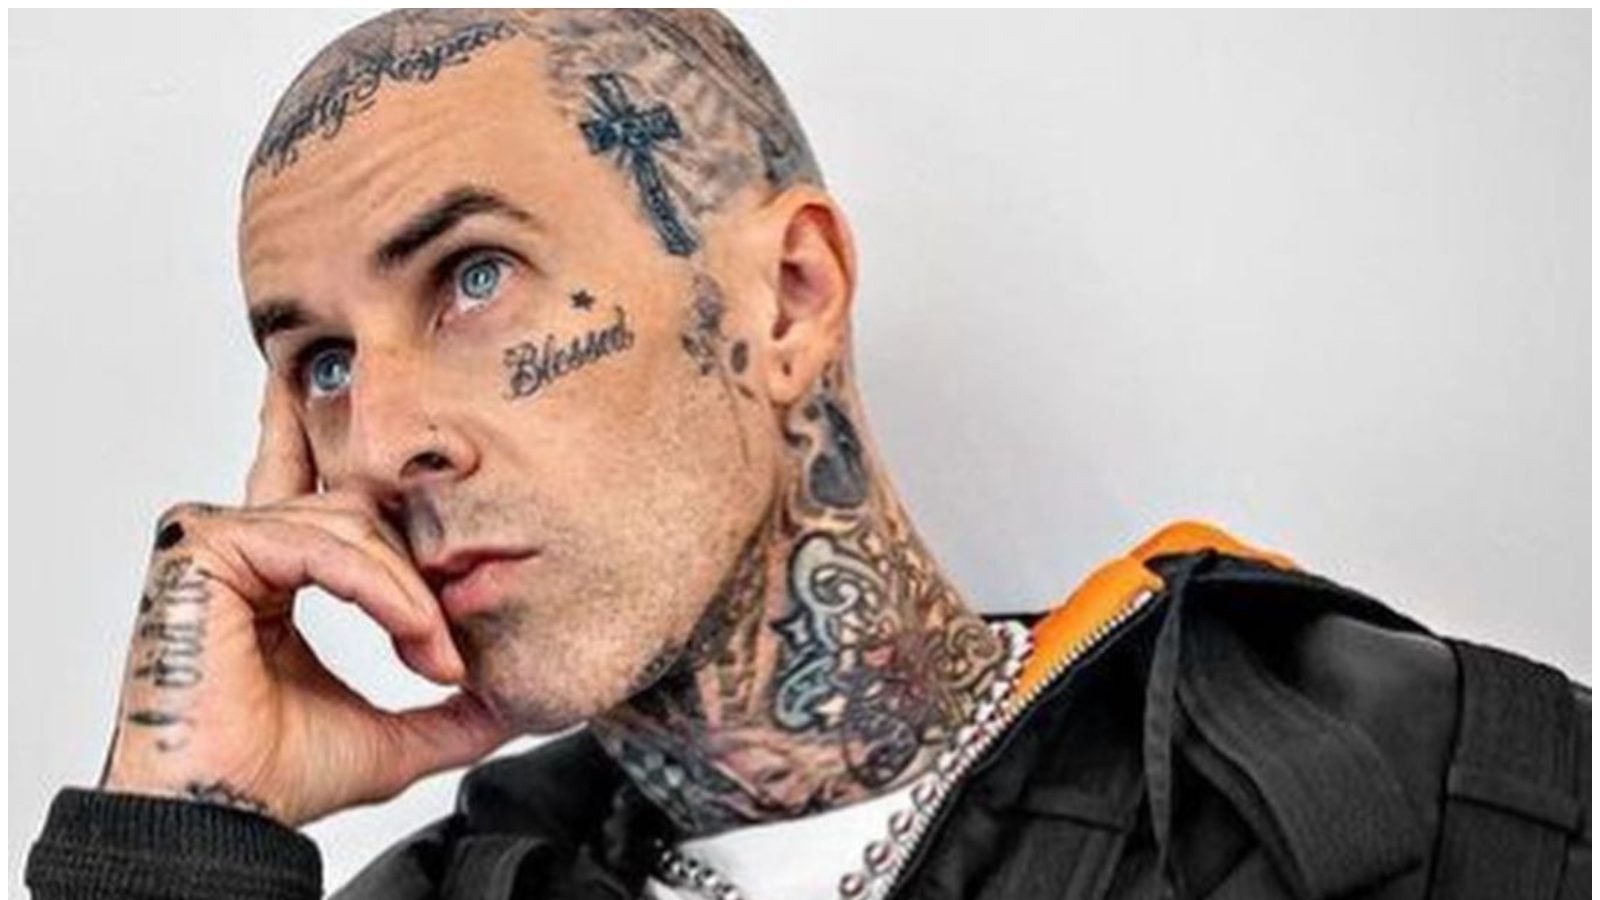 Travis Barker secretly tweets ‘God save me’ amid health scare, daughter posts photo from hospital